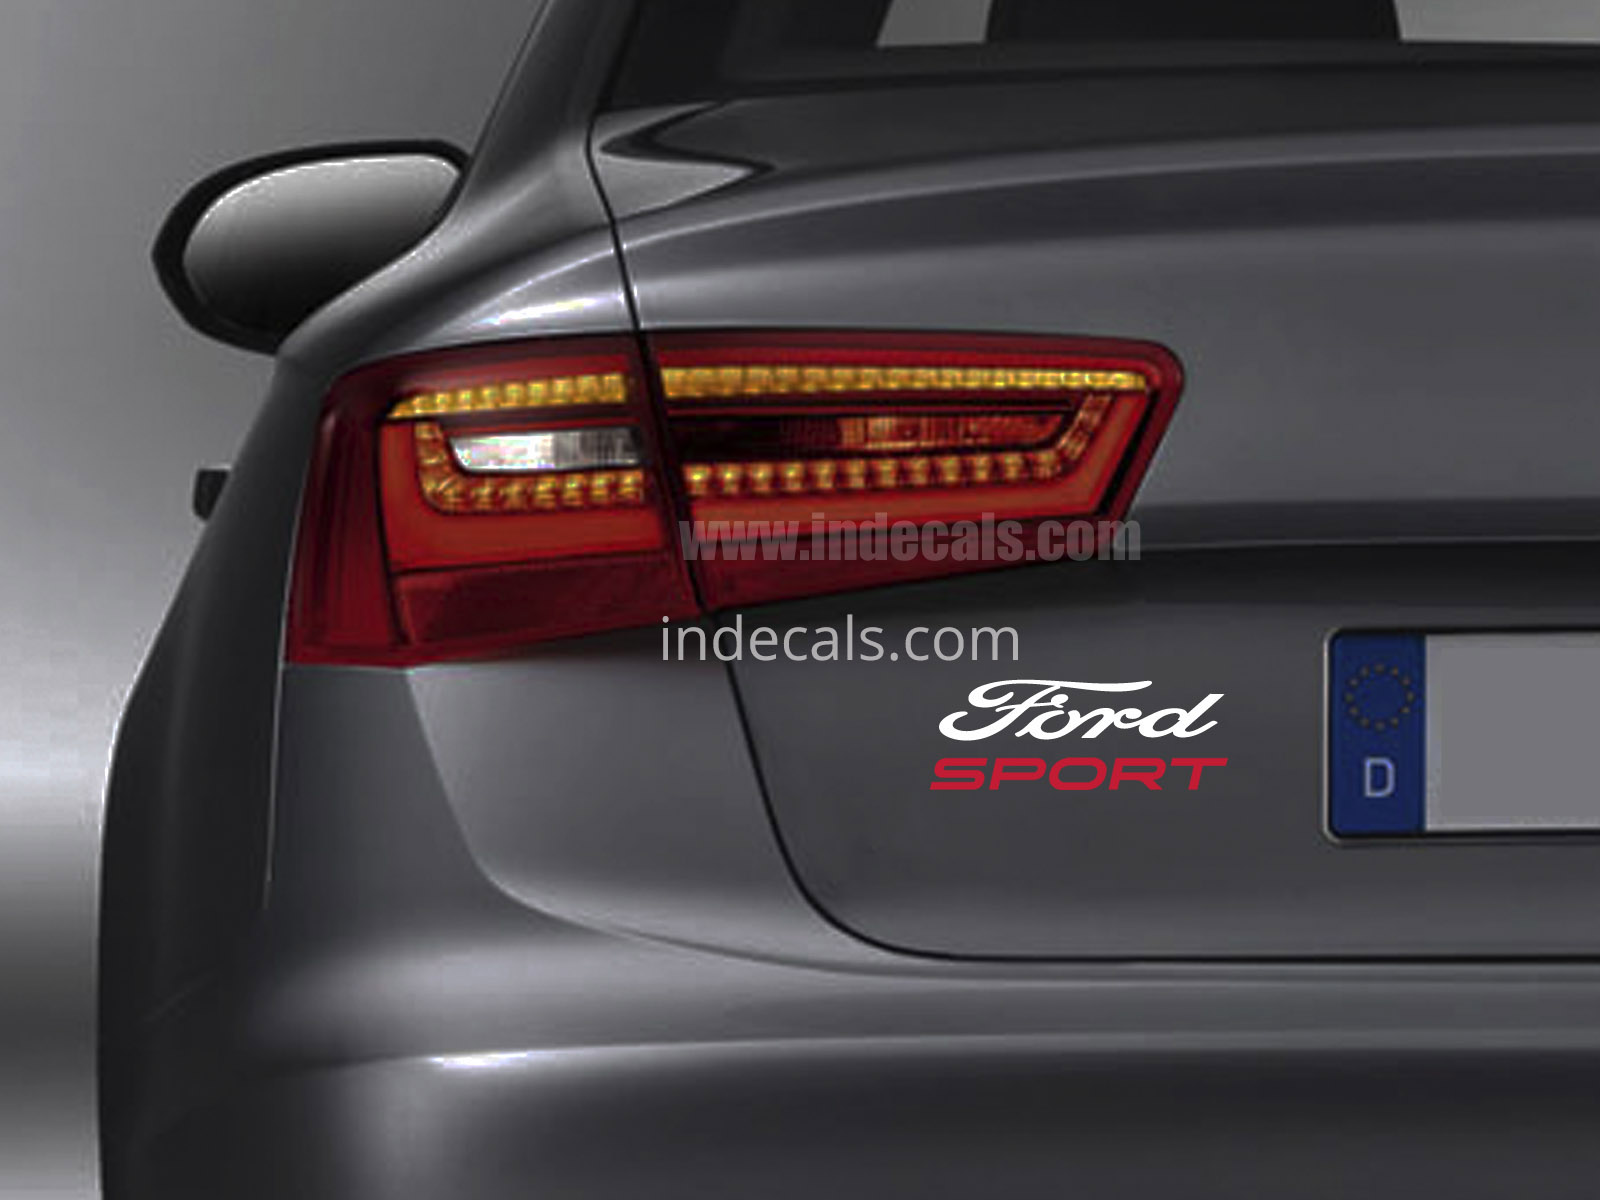 1 x Ford Sports Sticker for Trunk - White & Red